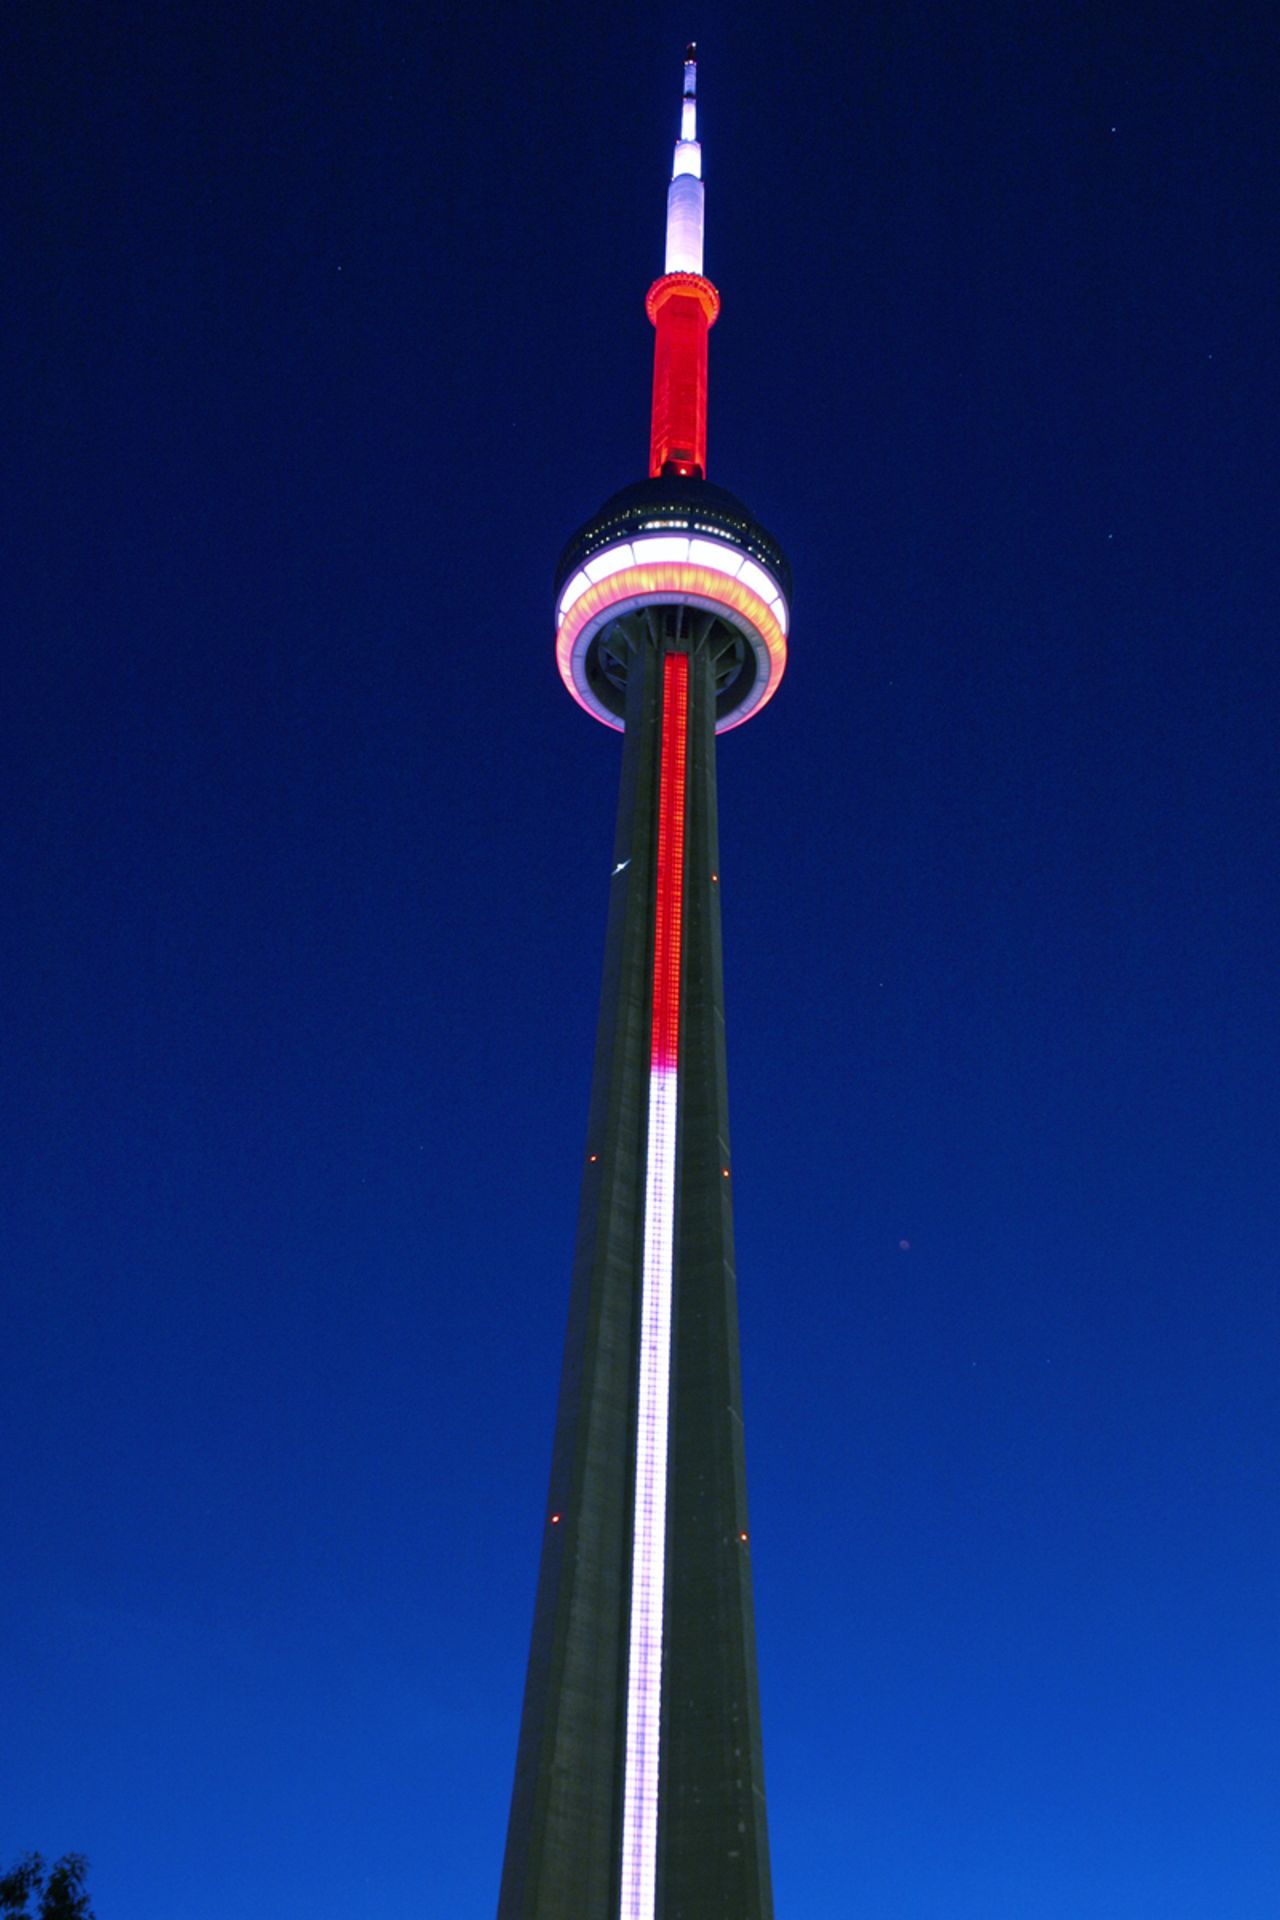 The CN Tower was built to withstand an earthquake of 8.5 on the Richter scale.<br />It was the world's tallest building when it was completed in 1976 and designed to withstand winds of up to 418 kph (260 mph). But strong winds and earthquakes are not the only factors the building has to contend with -- on average, lightning strikes the tower 75 times every year. Long copper strips, which run down the side of the building and are attached to grounding rods buried below ground, protect the structure from damage. <strong>Completion date:</strong> October 1, 1976.